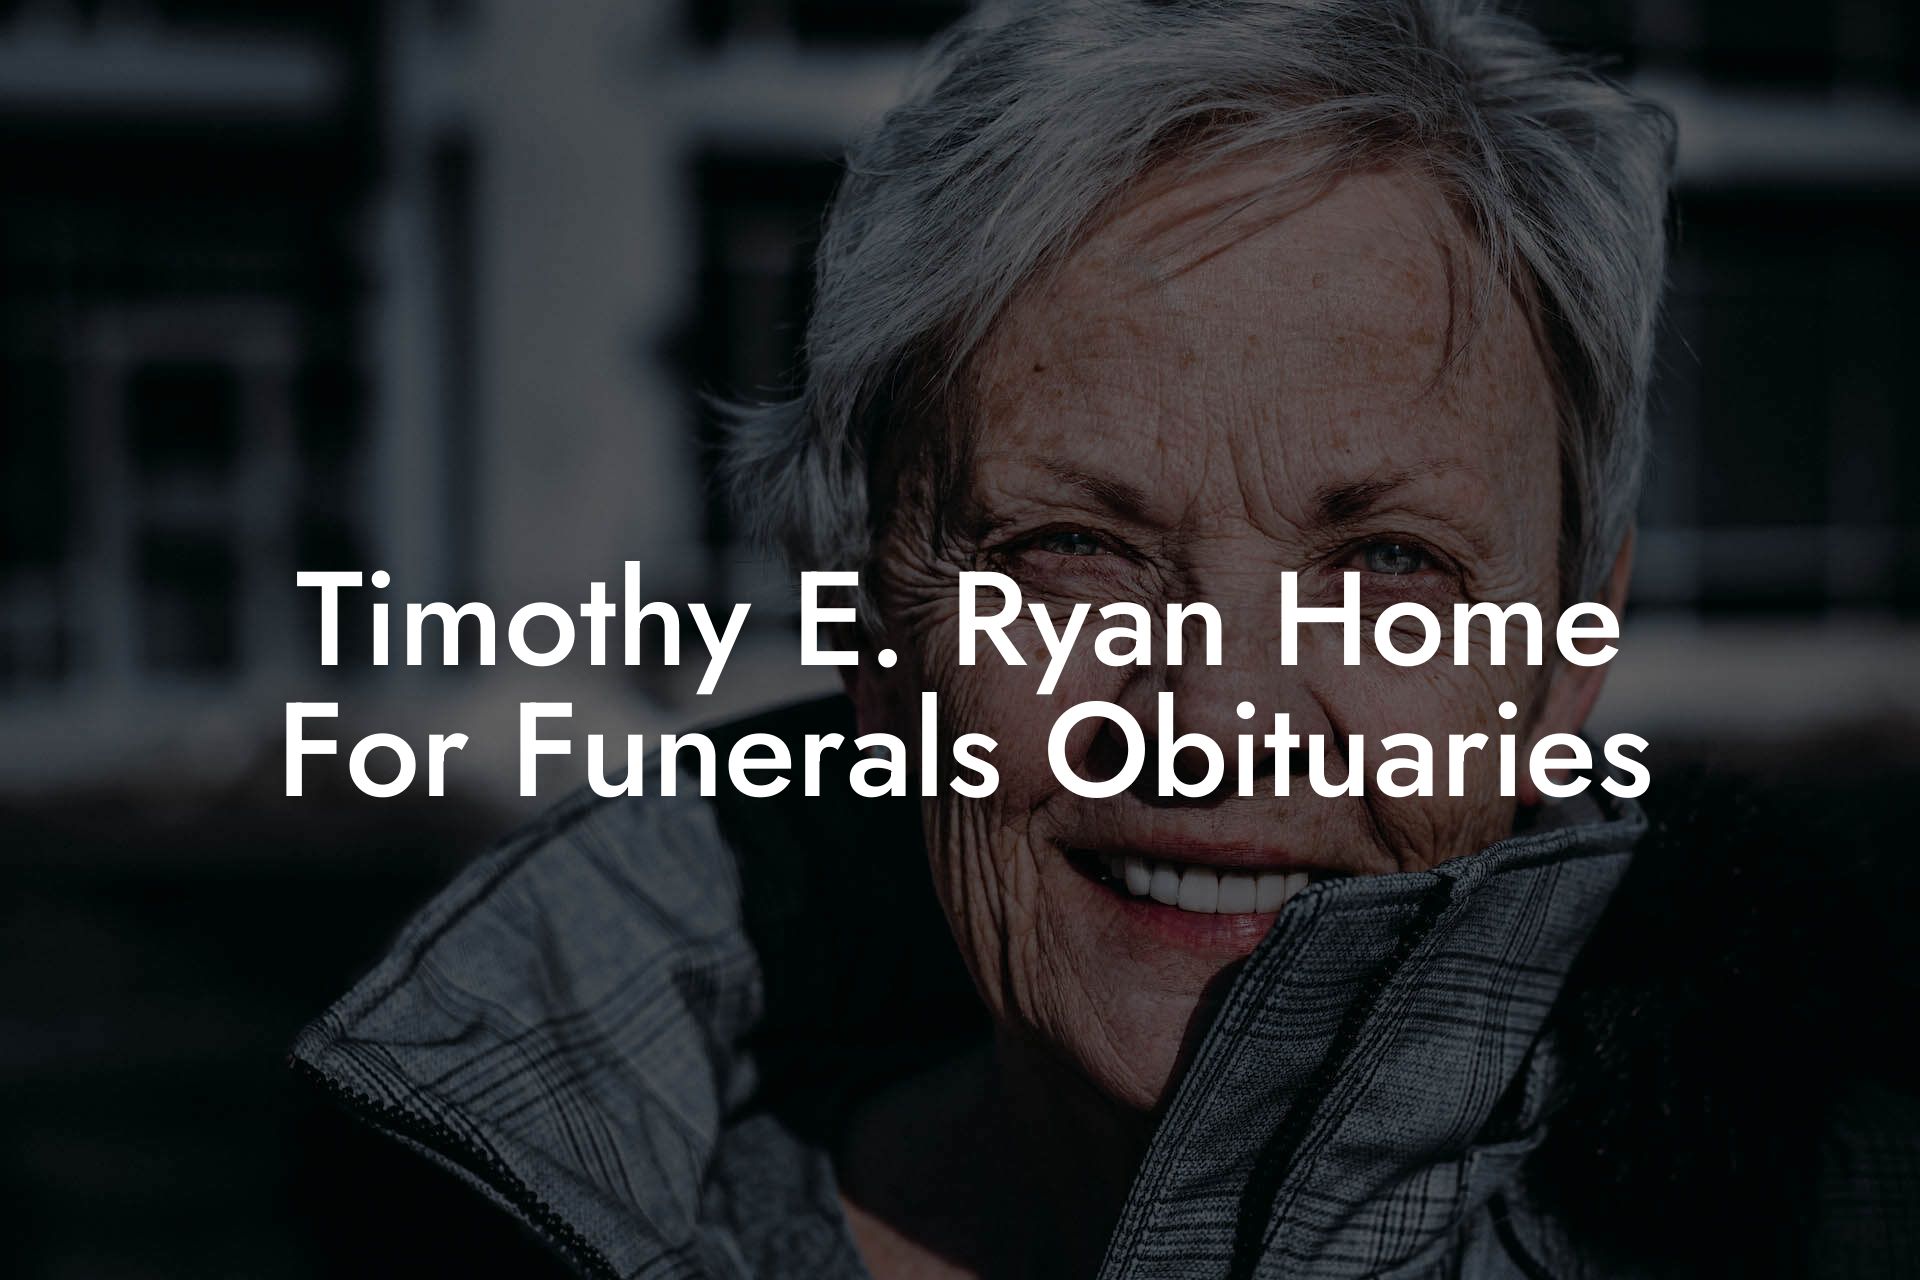 Timothy E. Ryan Home For Funerals Obituaries